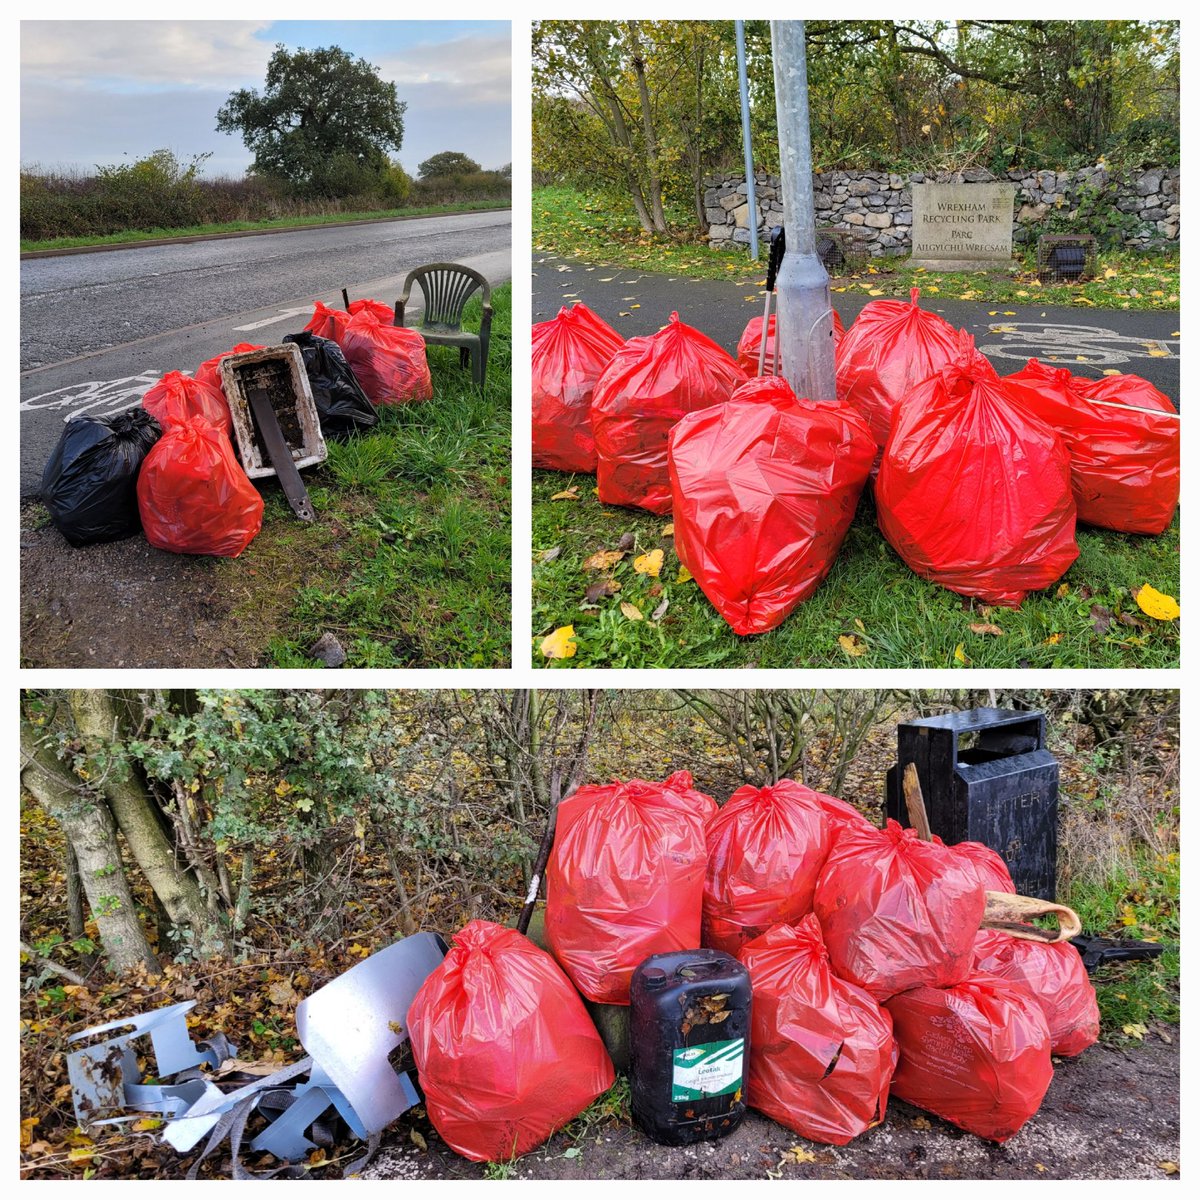 Seven Wrexham Litter Pickers were up and out early this morning picking Bryn Lane, on the Industrial Estate. 31 bags of rubbish picked, plus larger items. #KeepWalesTidy #Wrexham #Litter #dontbeatosser